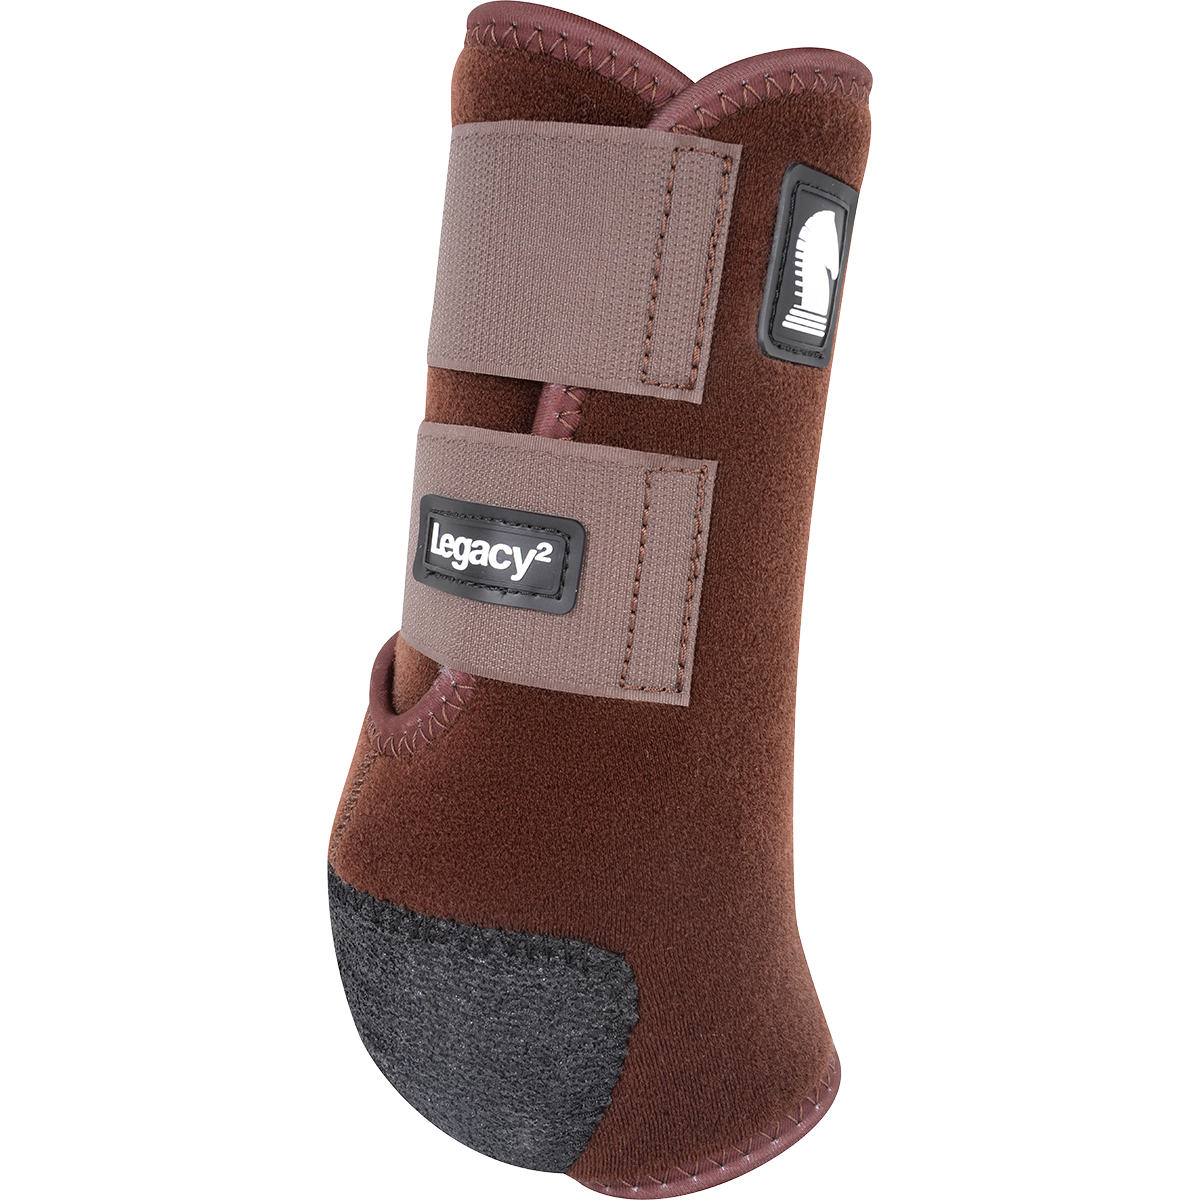 Classic Equine Legacy 2 boots - Chocolate